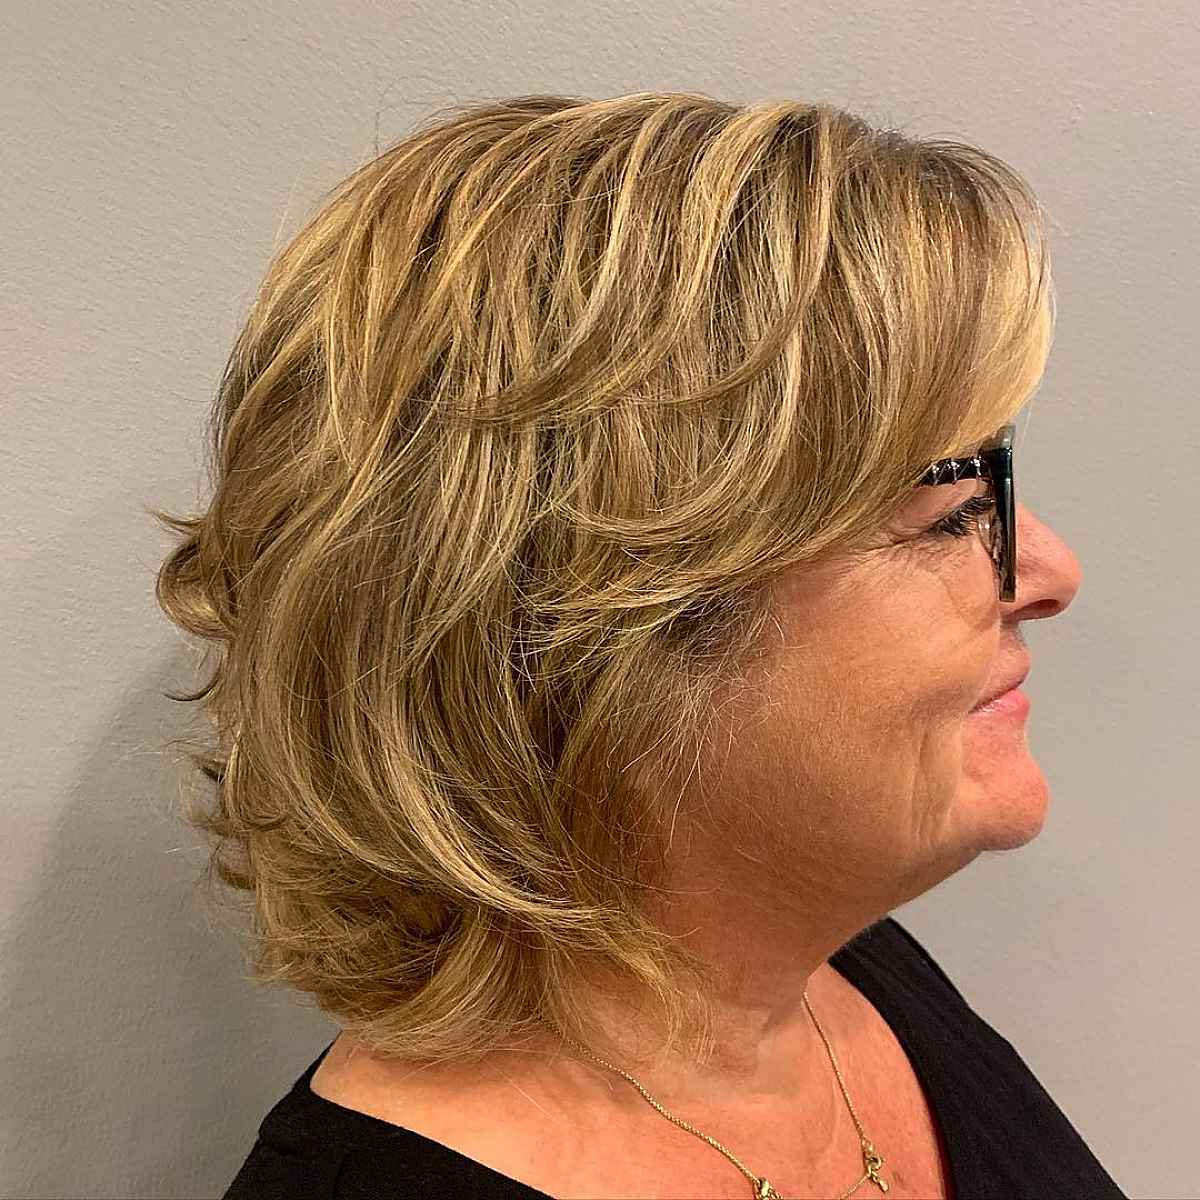 Hairstyles for older women – elegant and chic haircuts ideas